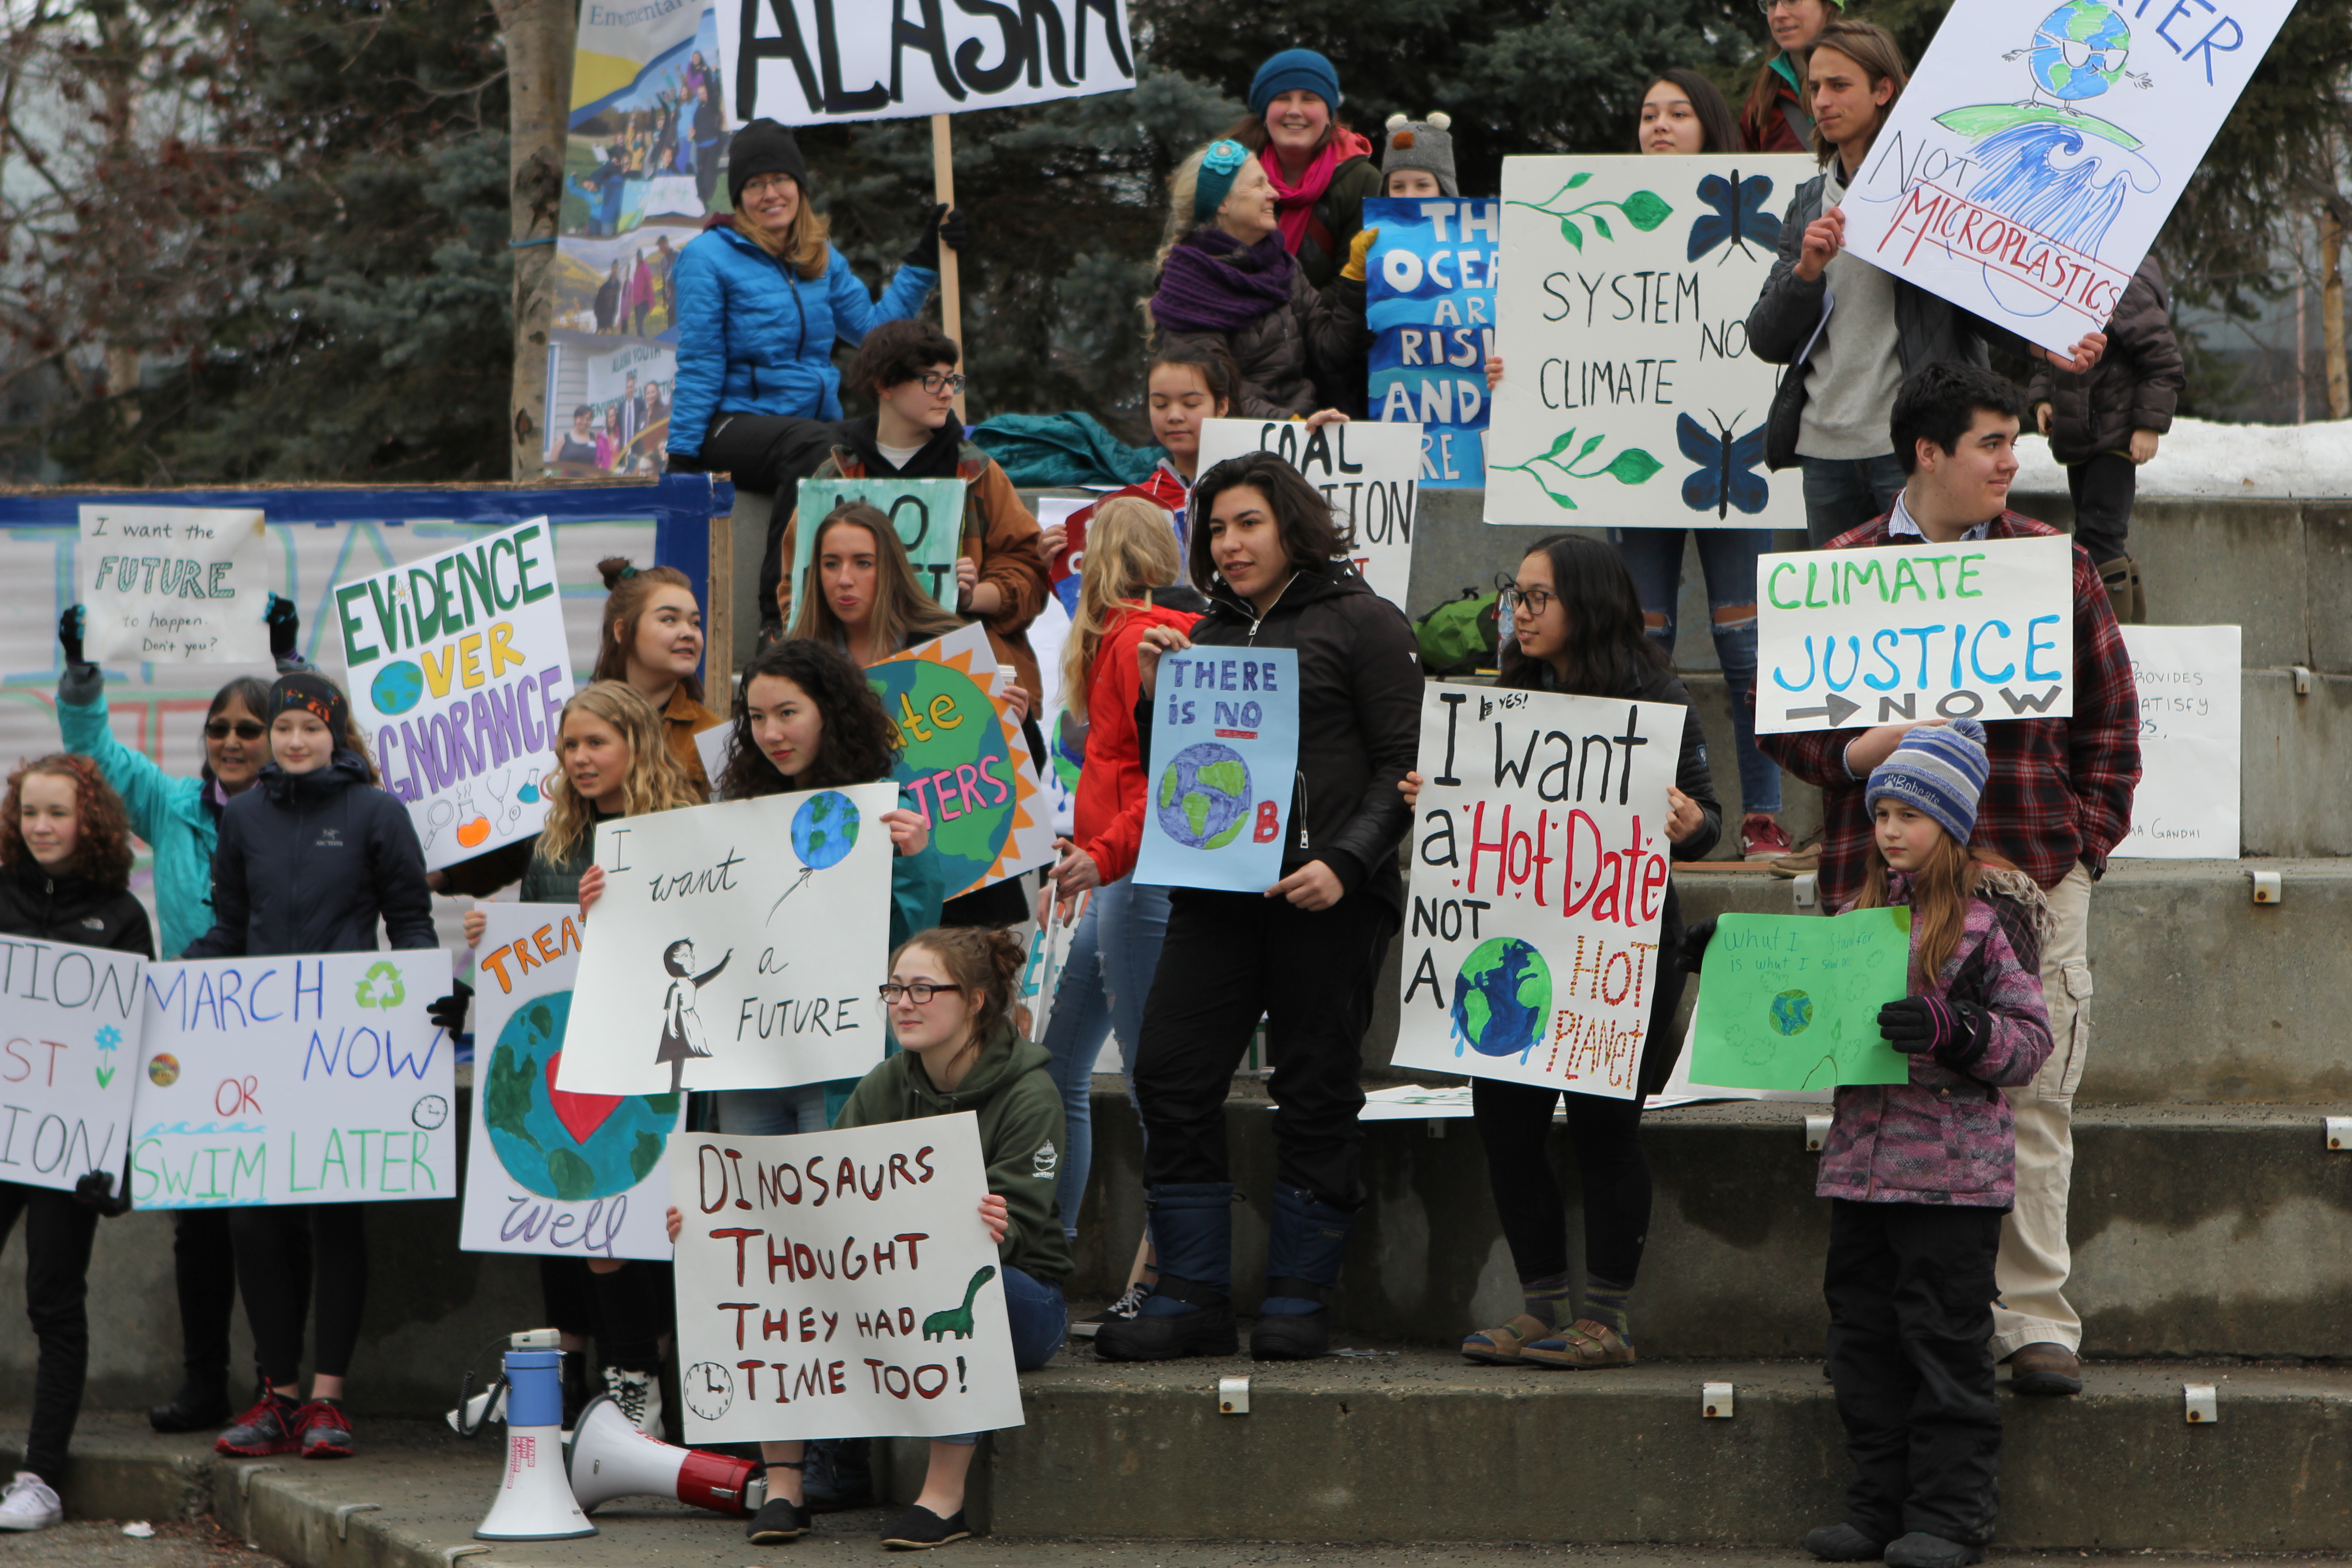 A crowd of young people with signs protesting climate change inaction.